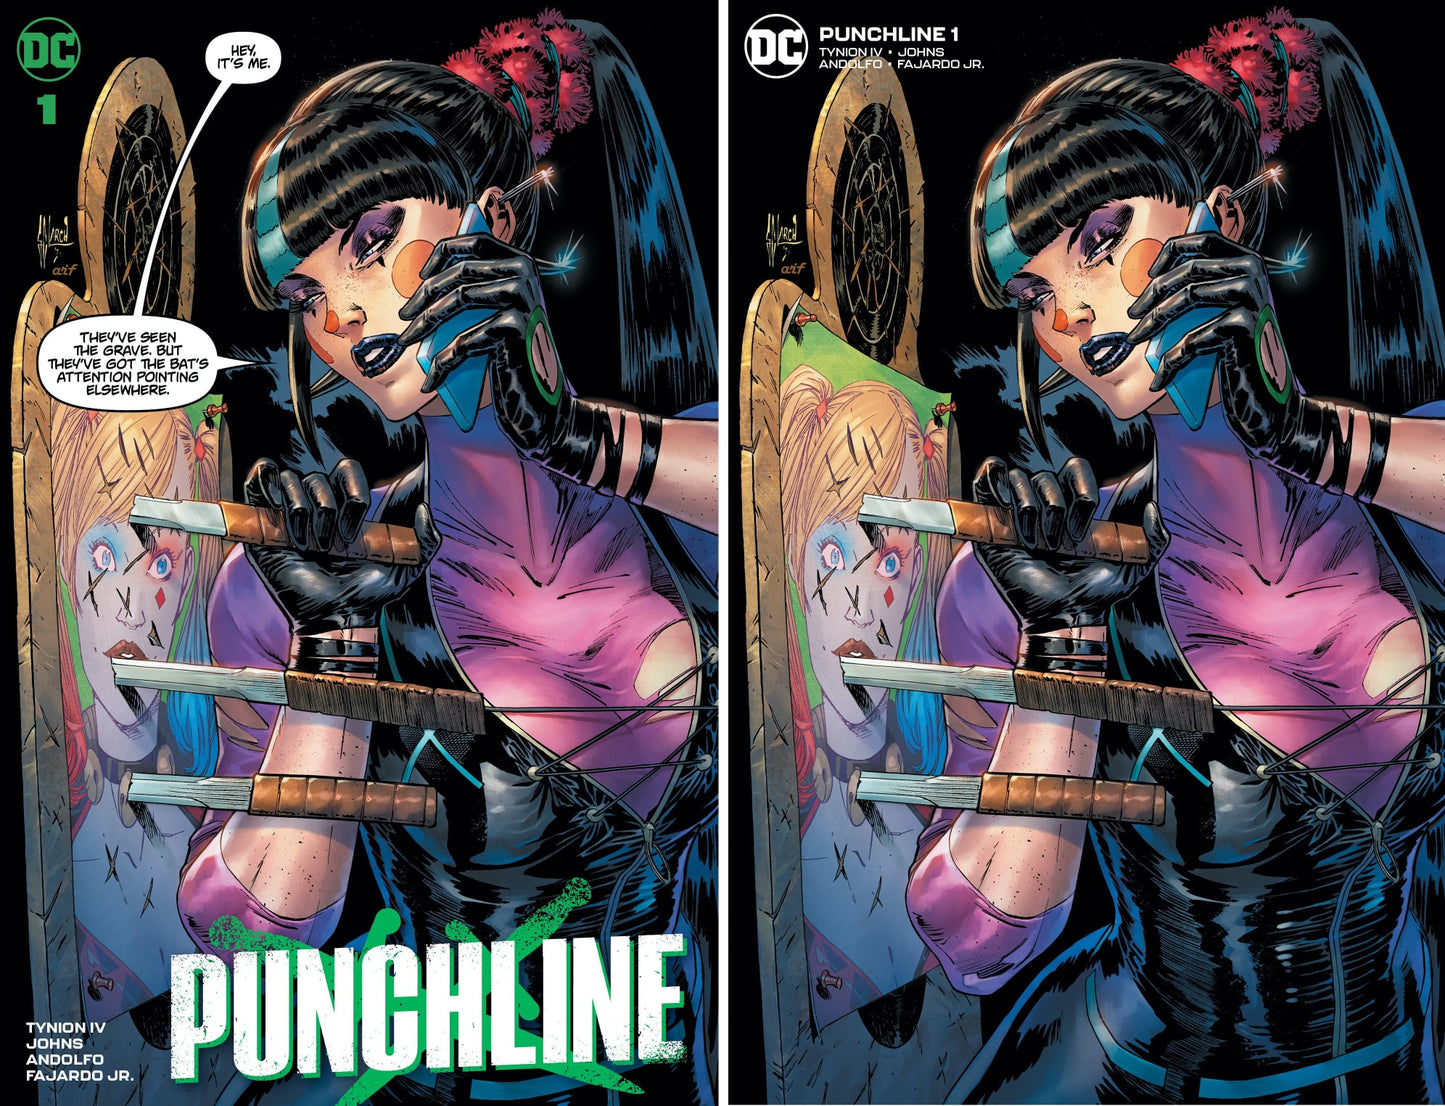 PUNCHLINE SPECIAL #1 GUILLEM MARCH TRADE/MINIMAL TRADE VARIANT SET LIMITED TO 600 SETS WITH NUMBERED COA